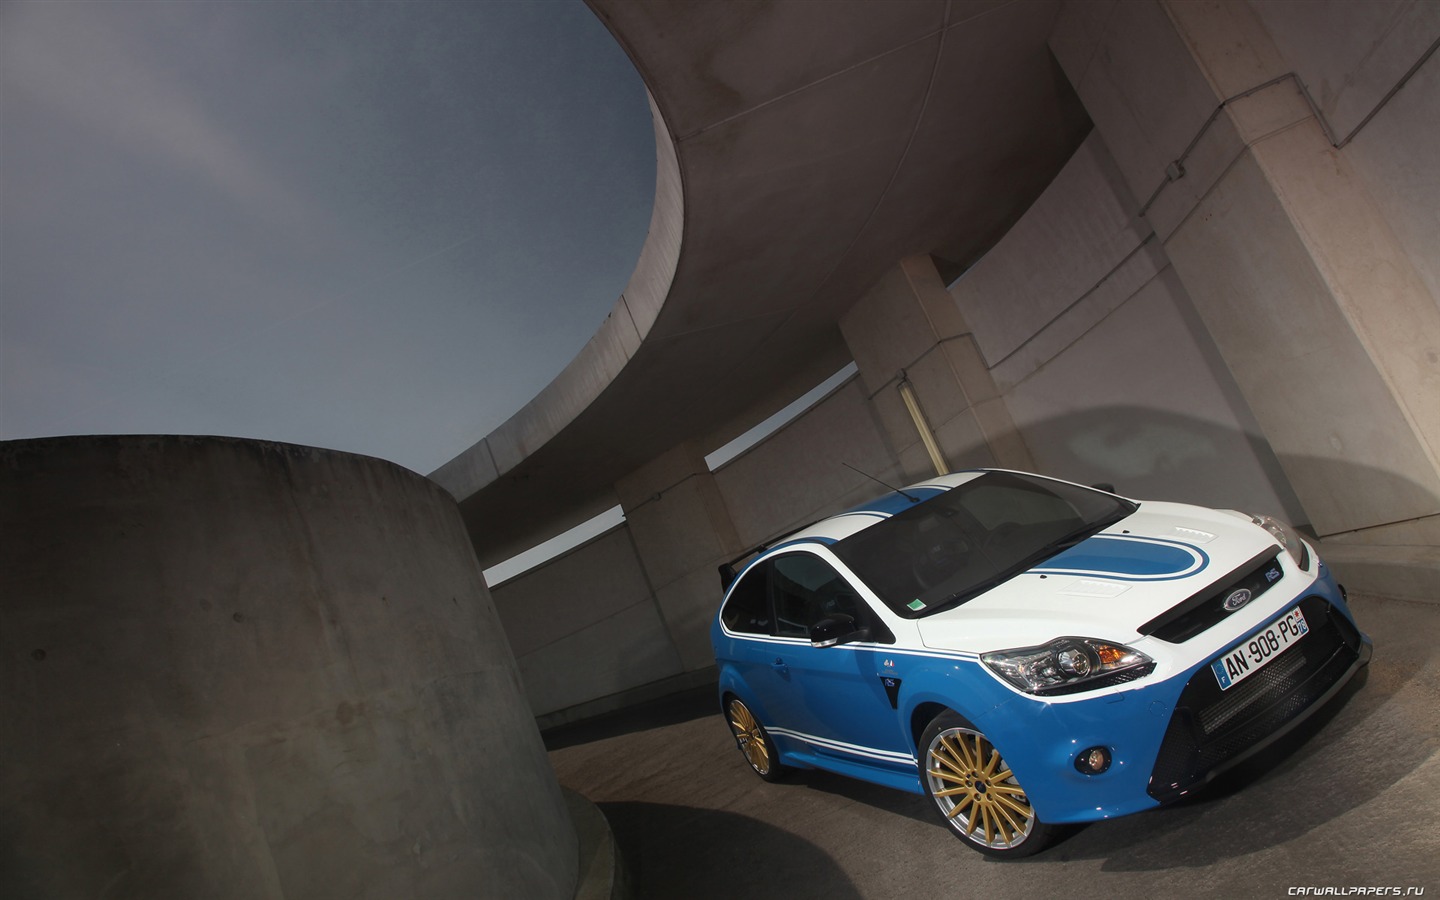 Ford Focus RS Le Mans Classic - 2010 HD Wallpaper #4 - 1440x900